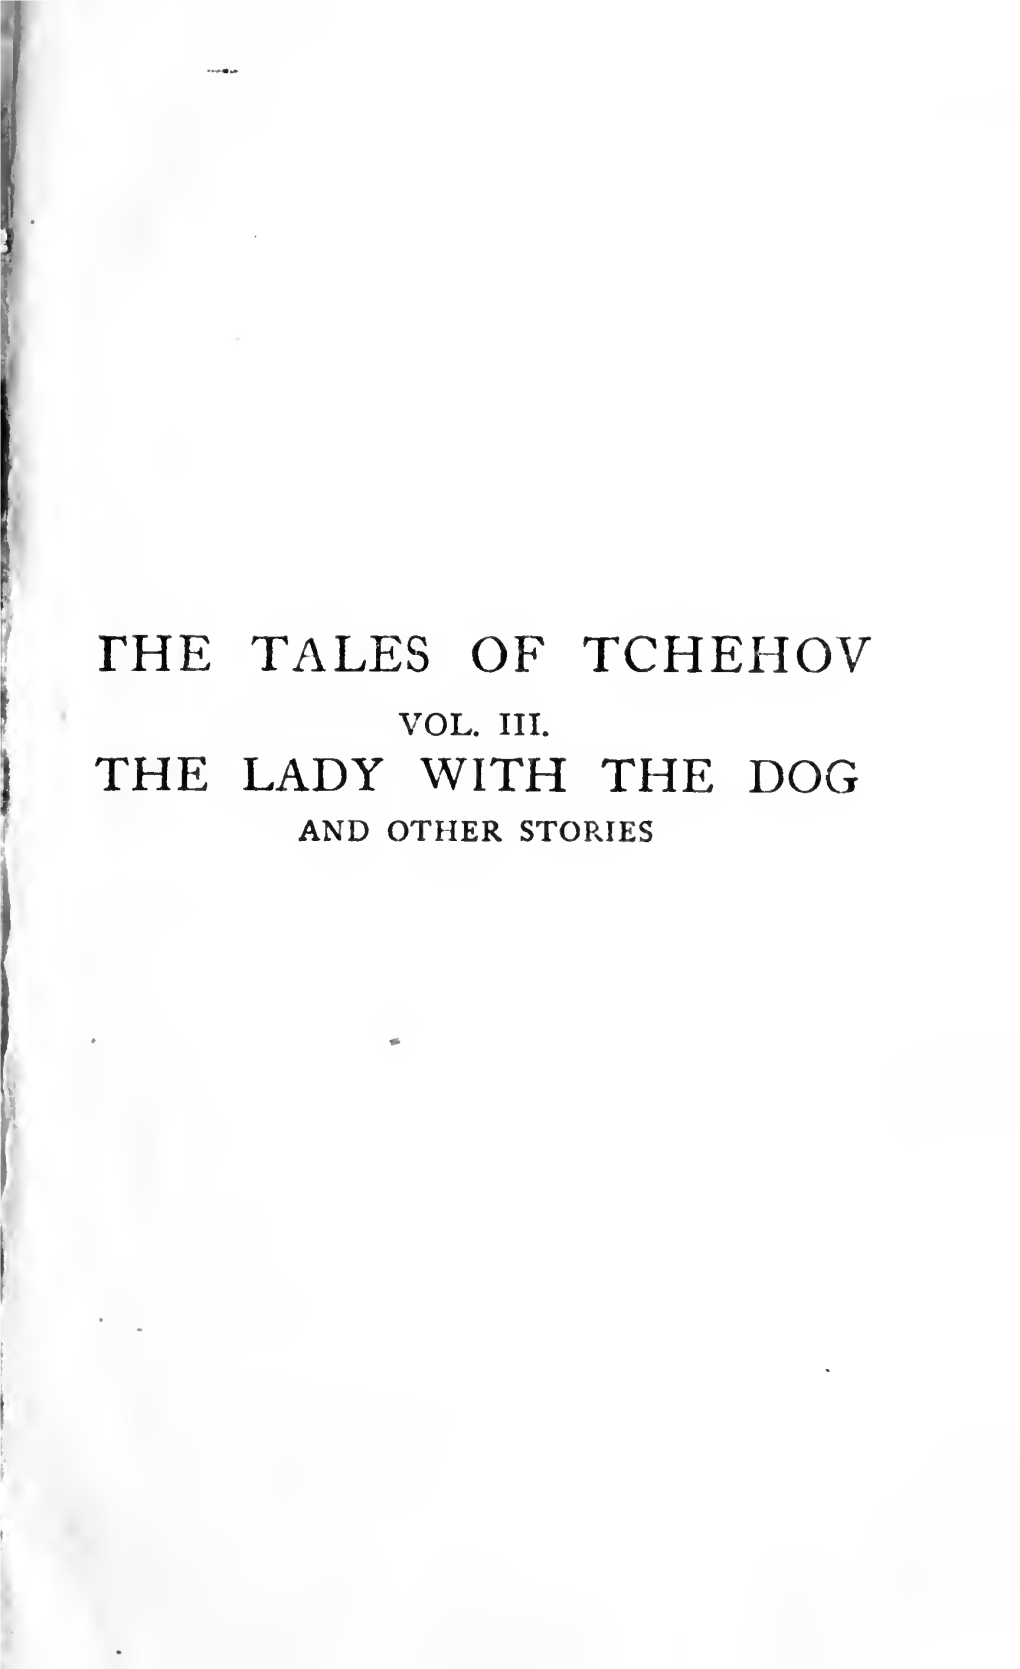 The Lady with the Dog, and Other Stories